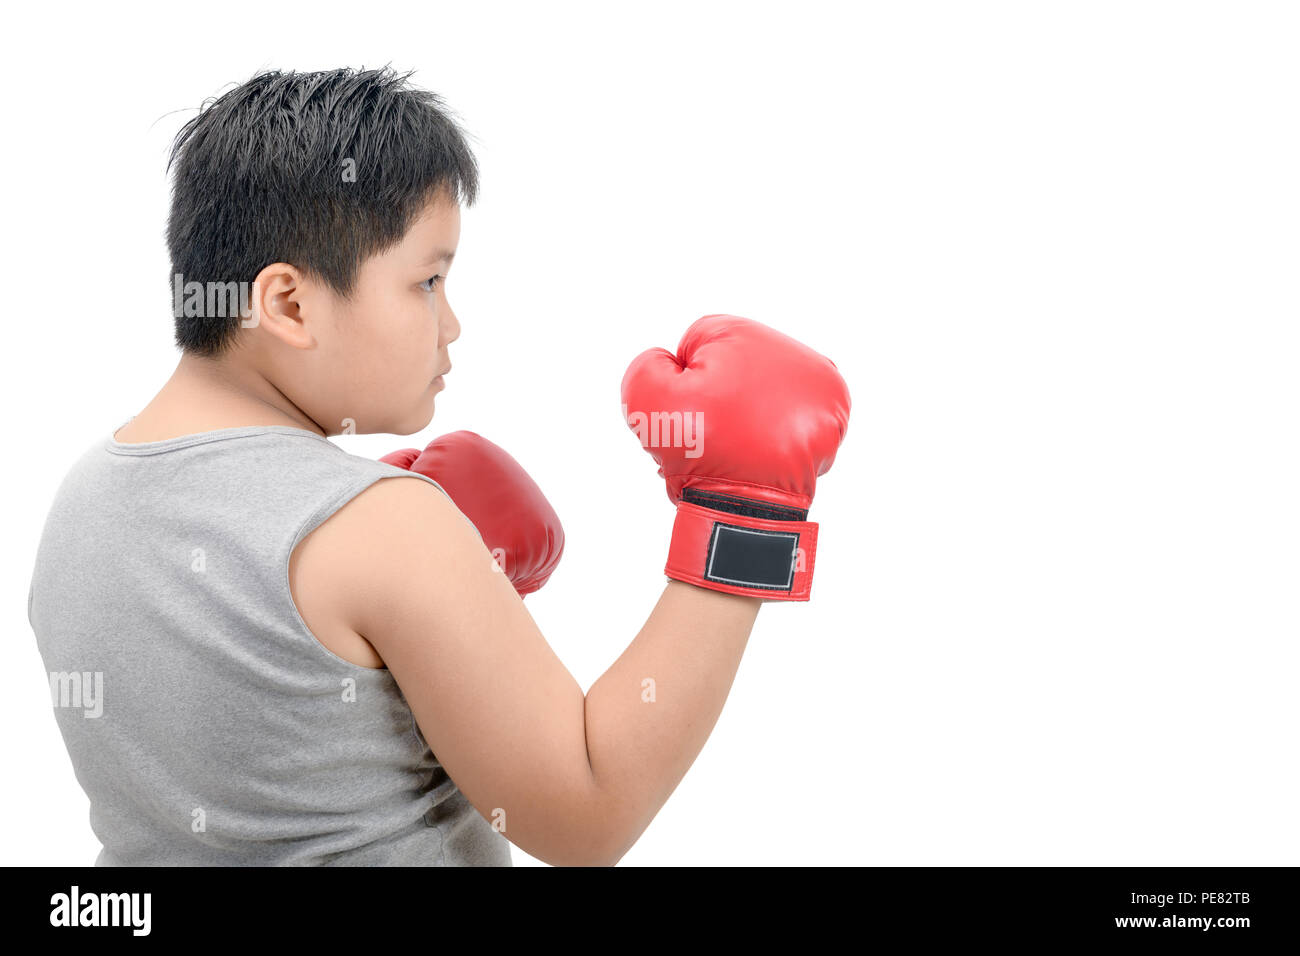 Obese fat boy kid fighting with red boxing gloves isolated on white background, exercise and healthy concept Stock Photo